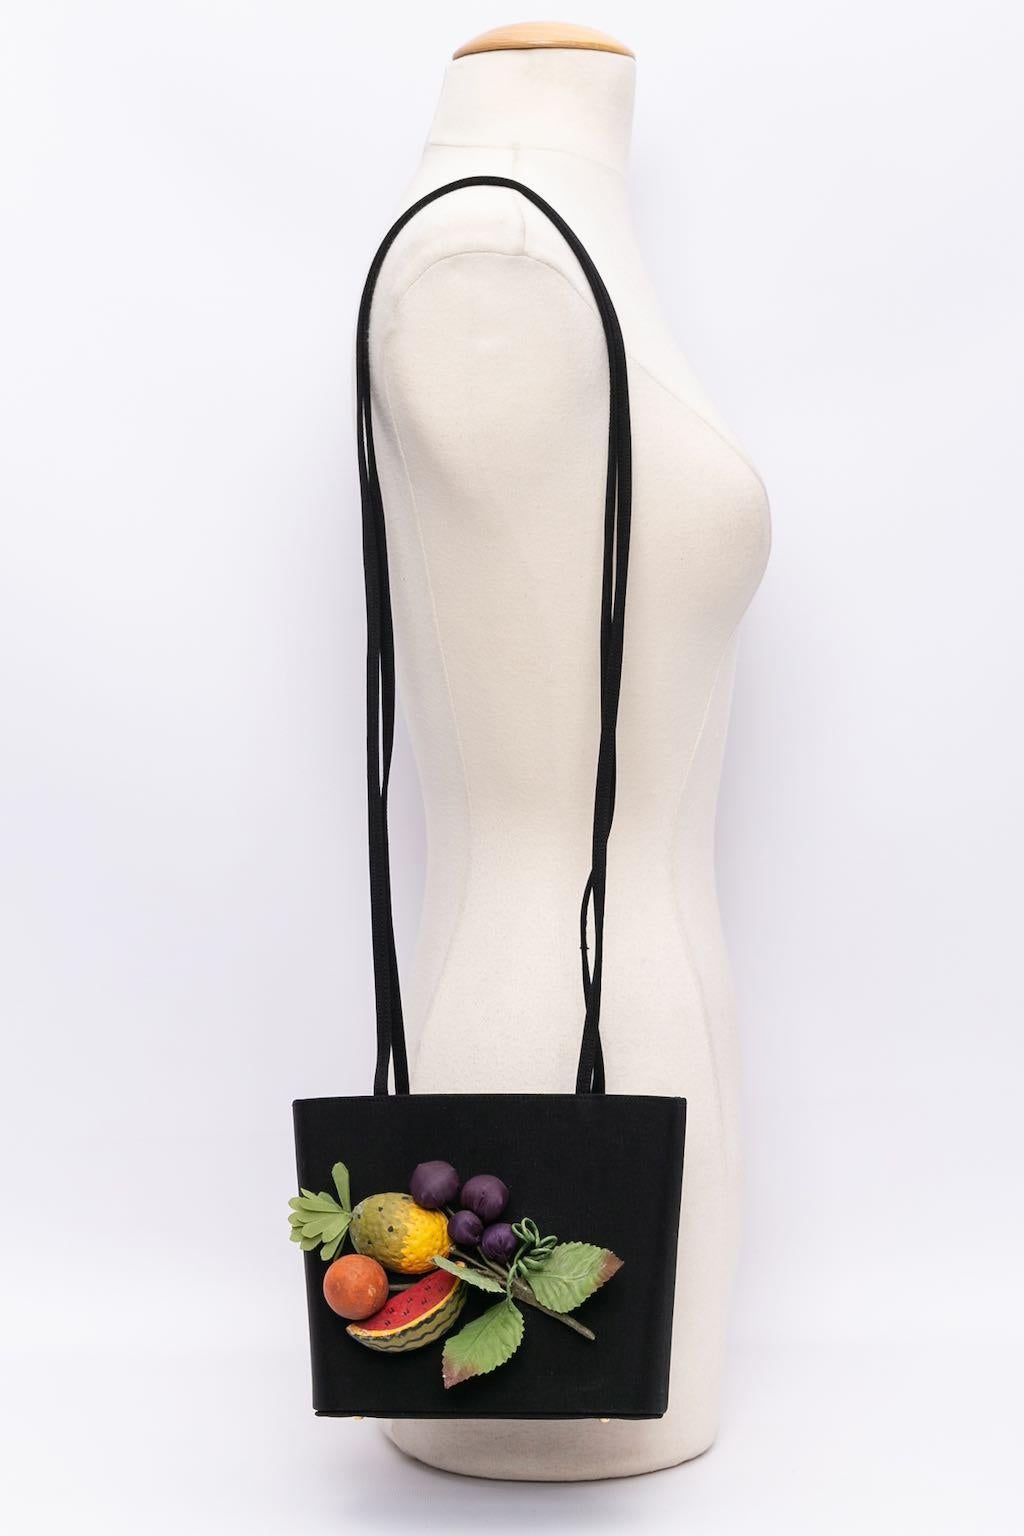 Andrea Pfister Fruits Bag in Black Fabric For Sale 6